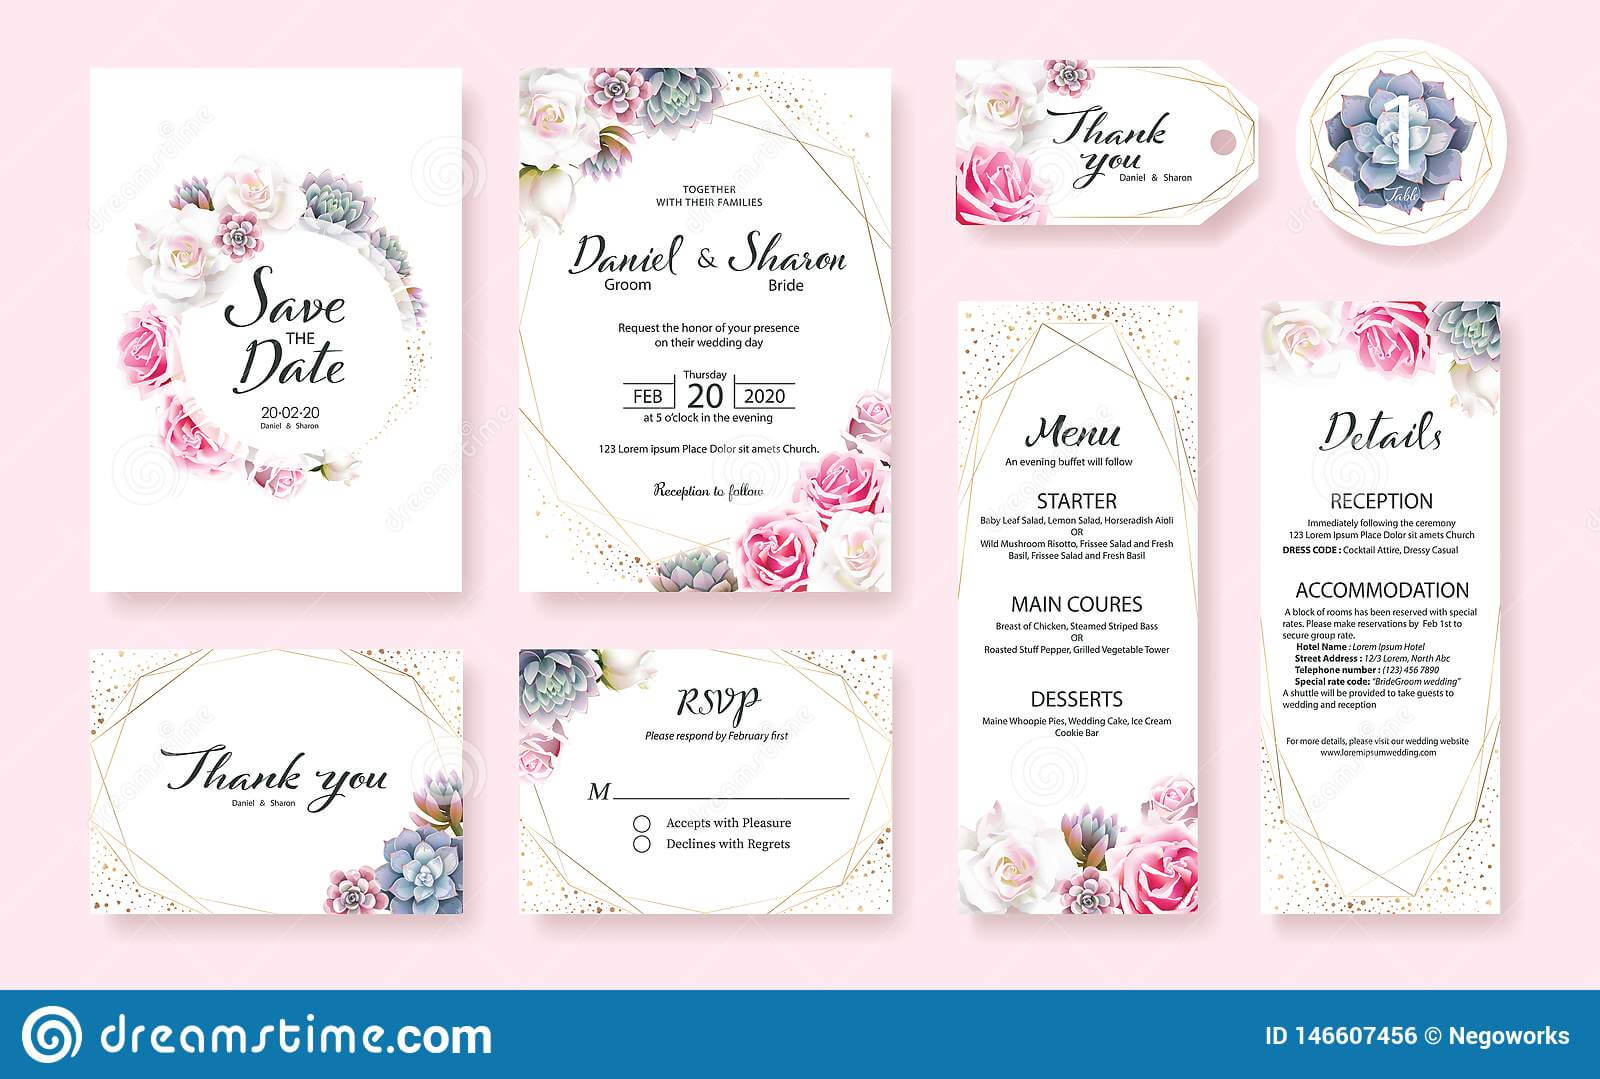 Floral Wedding Invitation Card, Save The Date, Thank You With Regard To Table Reservation Card Template